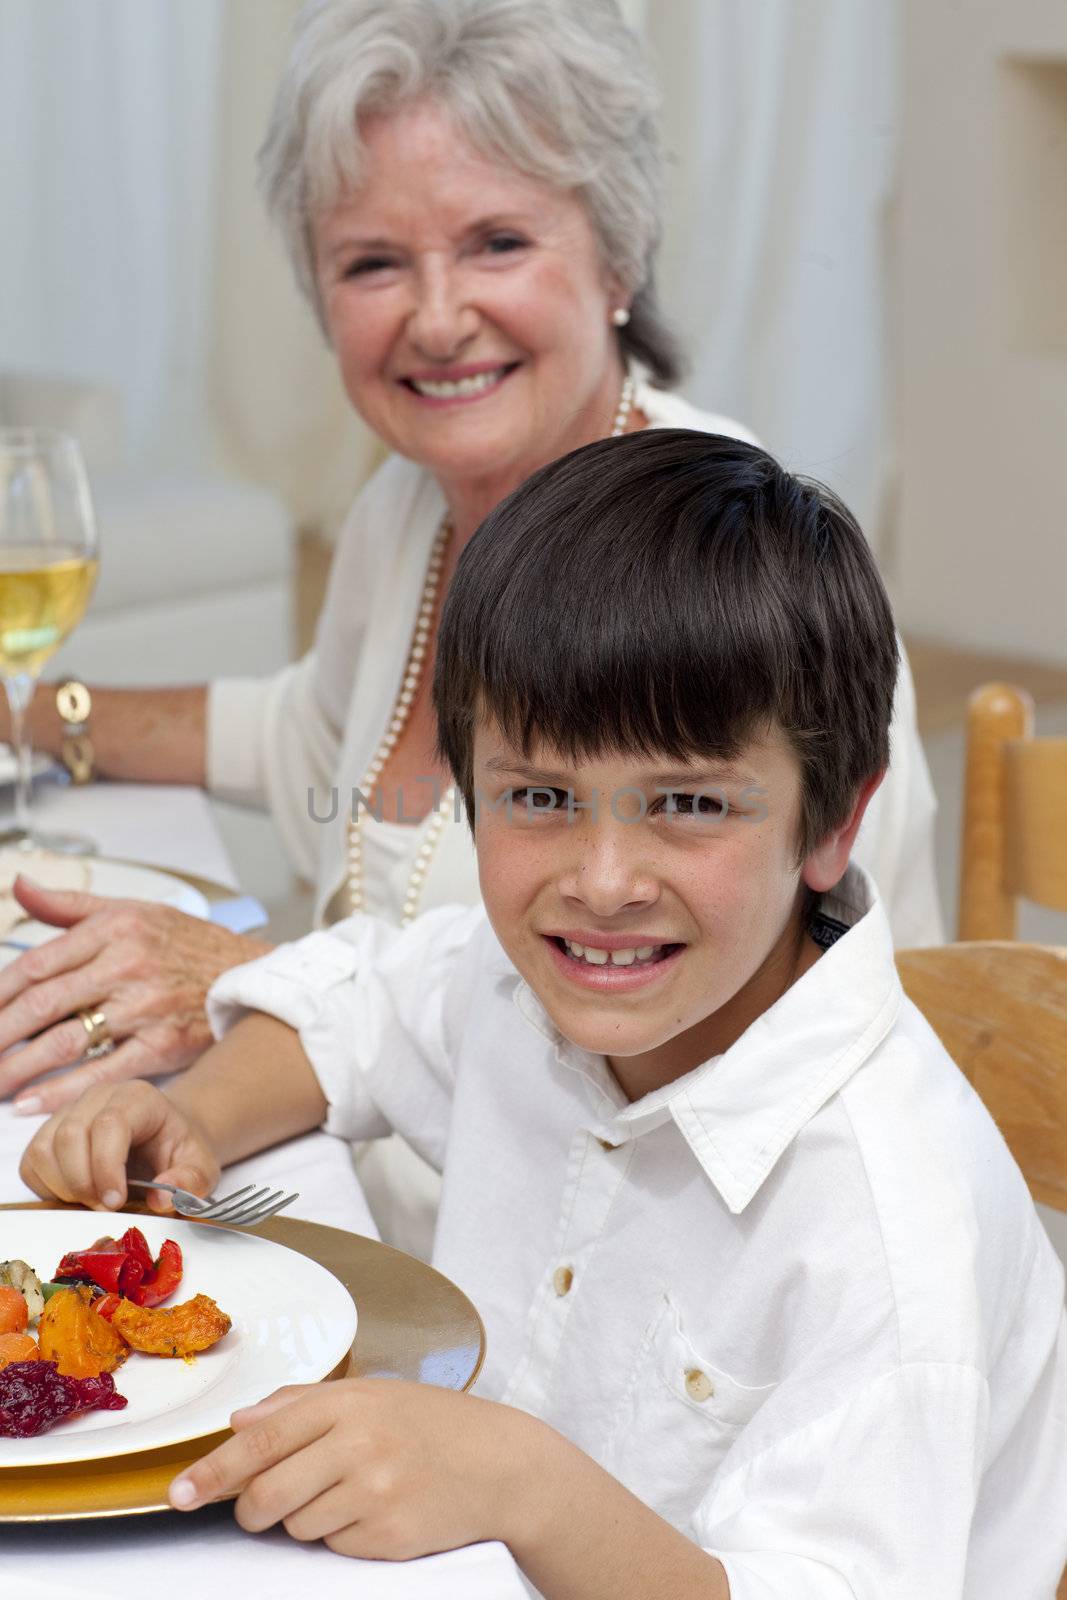 Smiling boy having dinner with his family by Wavebreakmedia